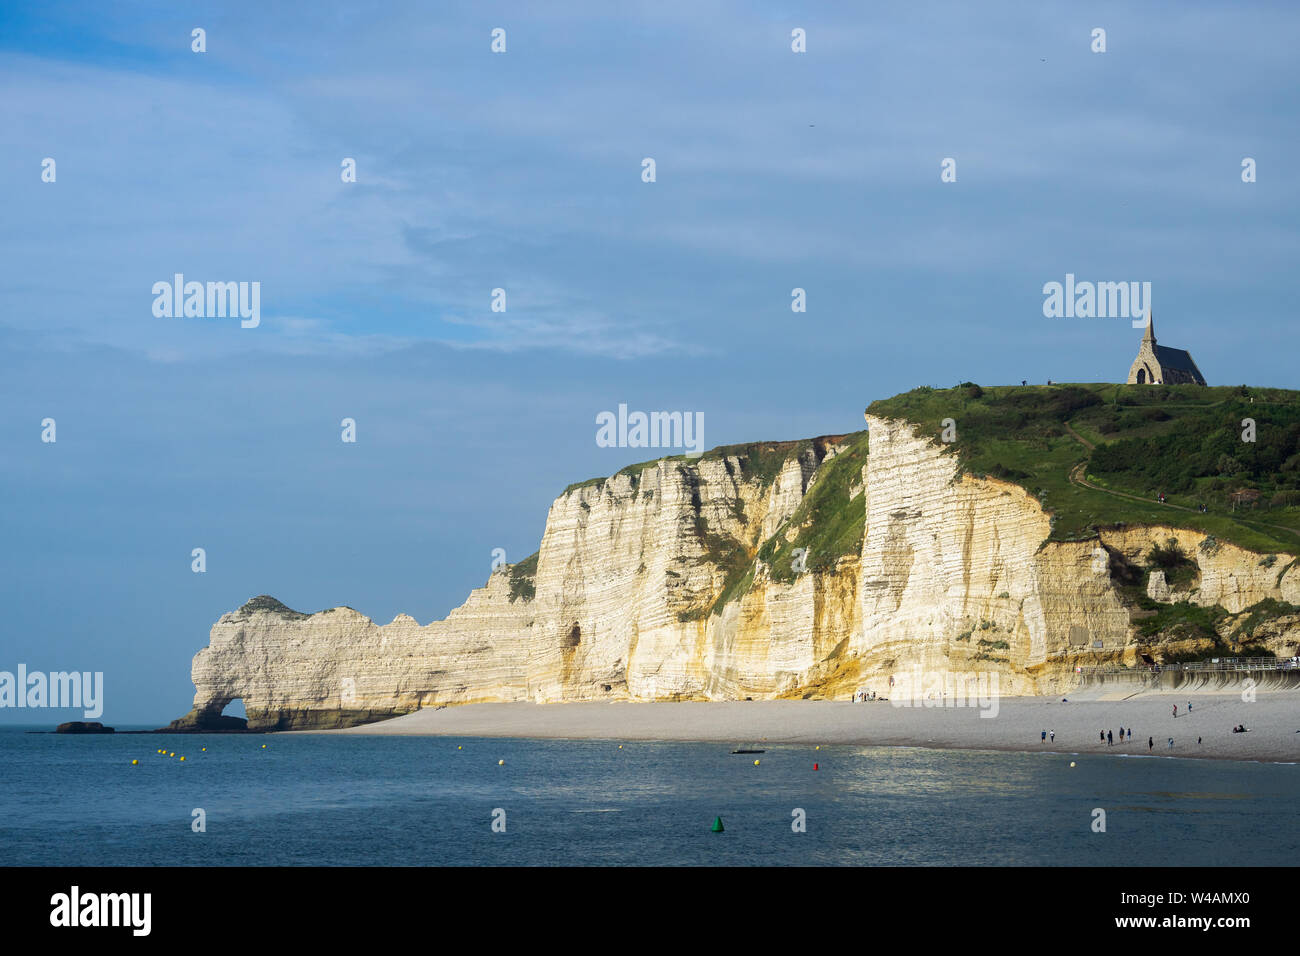 Scenic landscape of Etretat cliffs, iconic landmark of Normandy Coast, Falaise d'Amont, on late afternoon, France Stock Photo